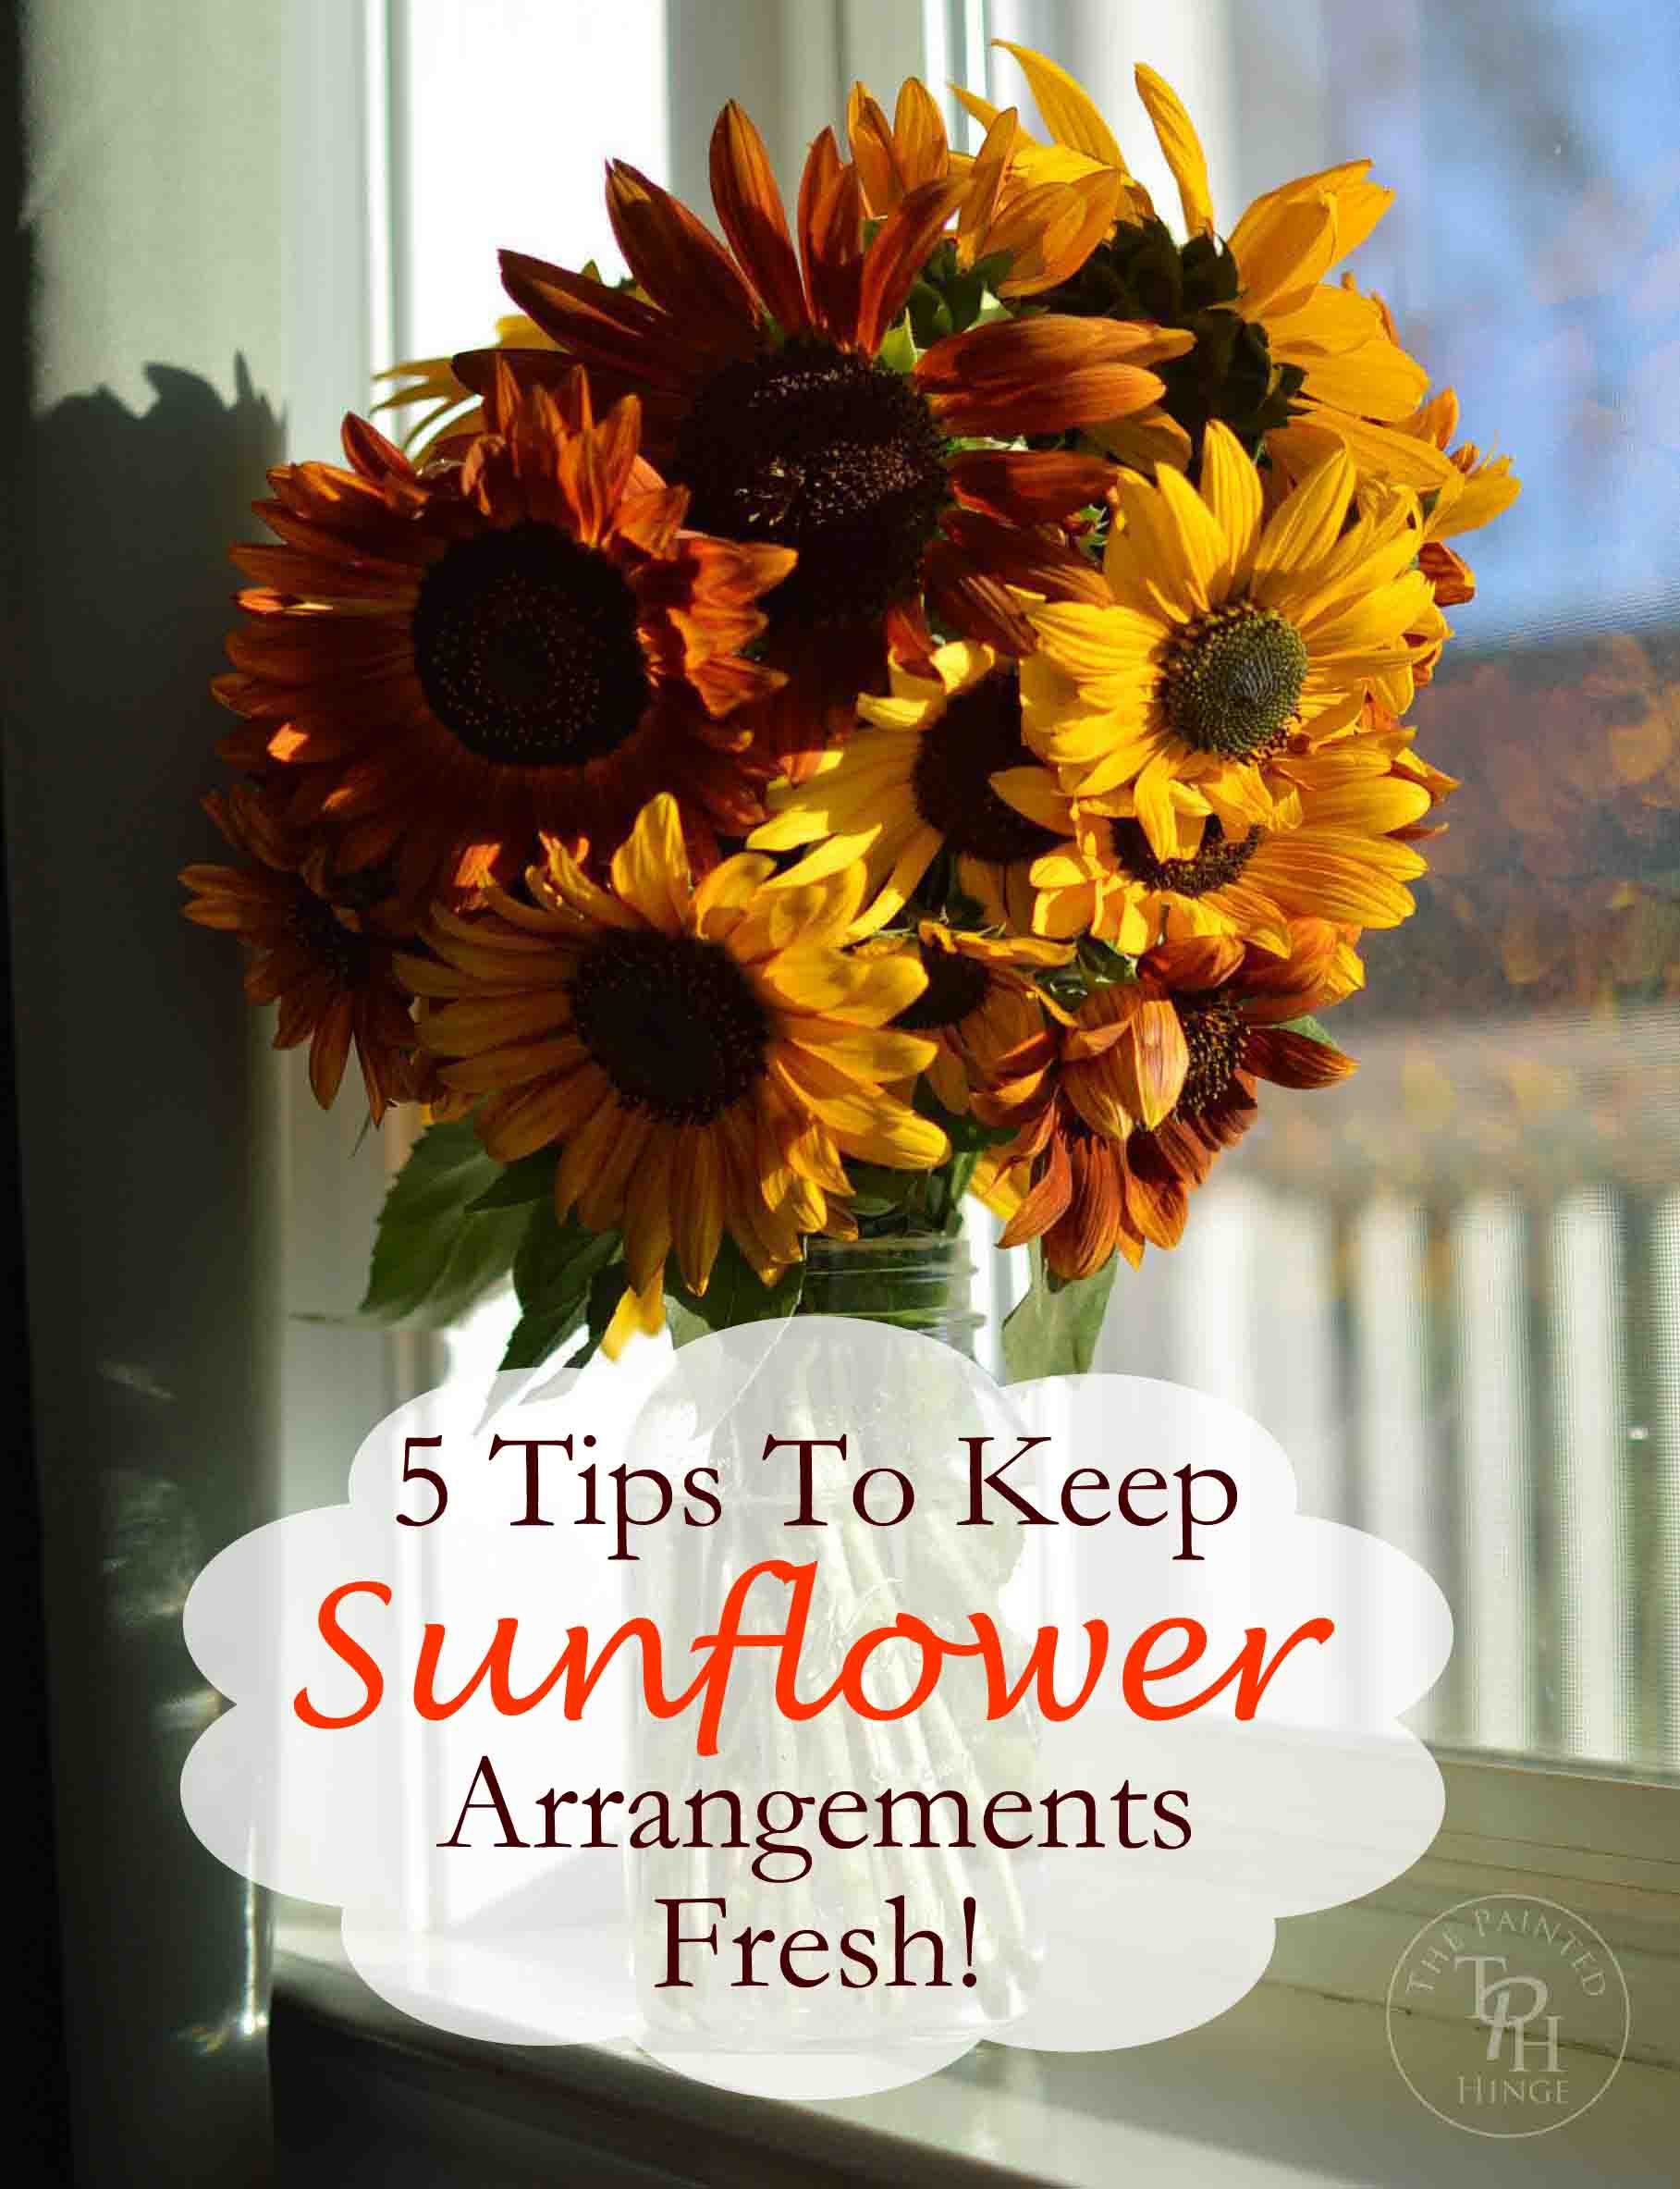 5 Tips On How To Keep Sunflowers Alive And Fresh